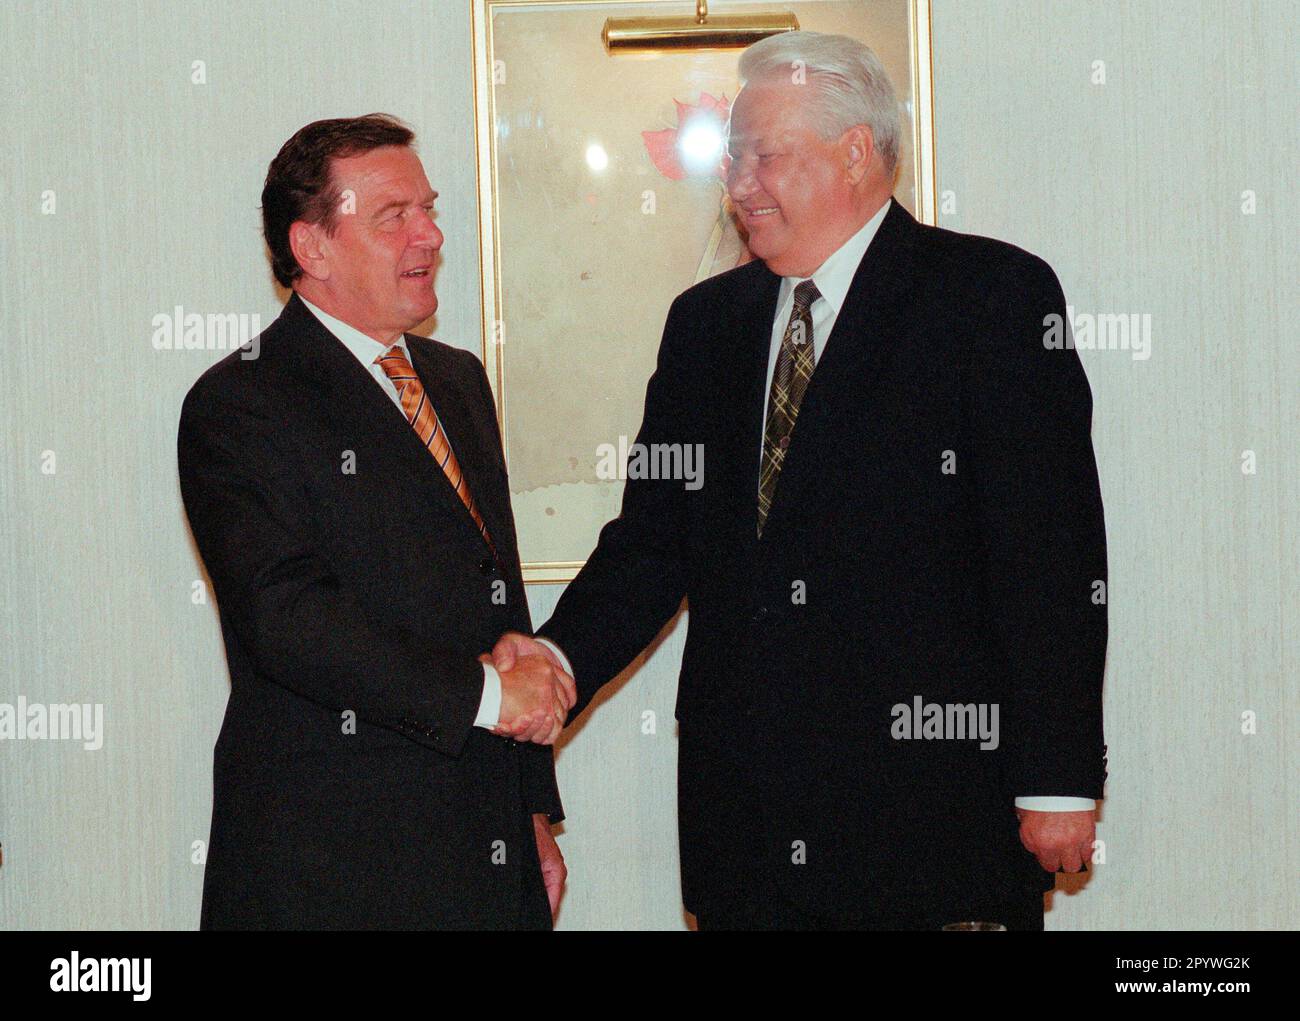 G8 Summit in Cologne : Boris JELZIN ( YELTSIN ) , President of Russia , meets German Chancellor Gerhard SCHROEDER , SPD , 20.06.1999 [automated translation] Stock Photo